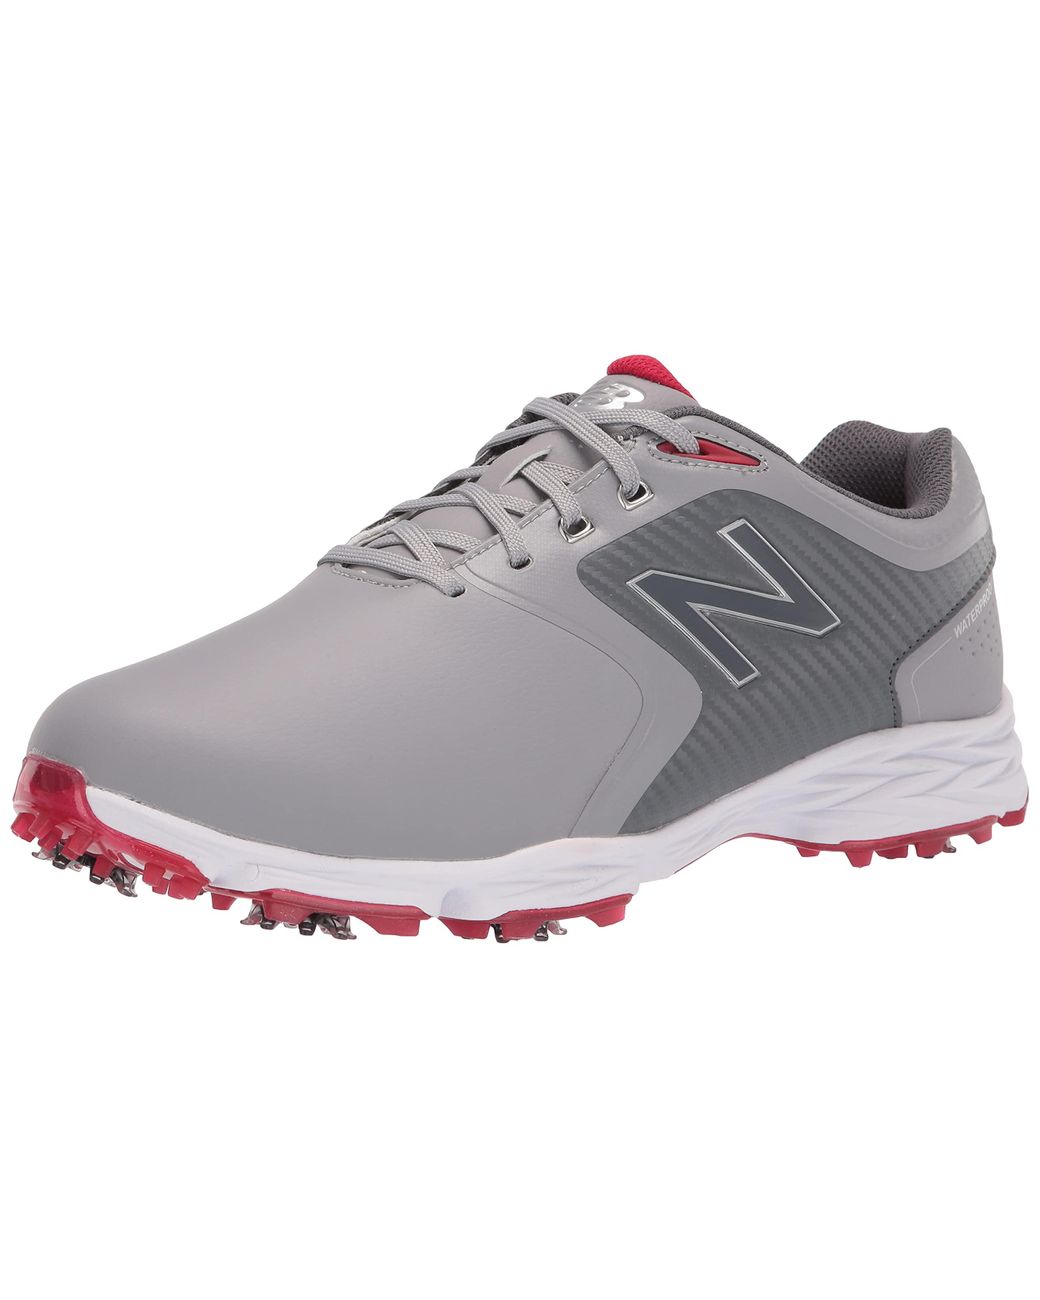 New Balance Leather Striker V2 Golf Shoe in Grey/Red (Gray) for Men - Lyst